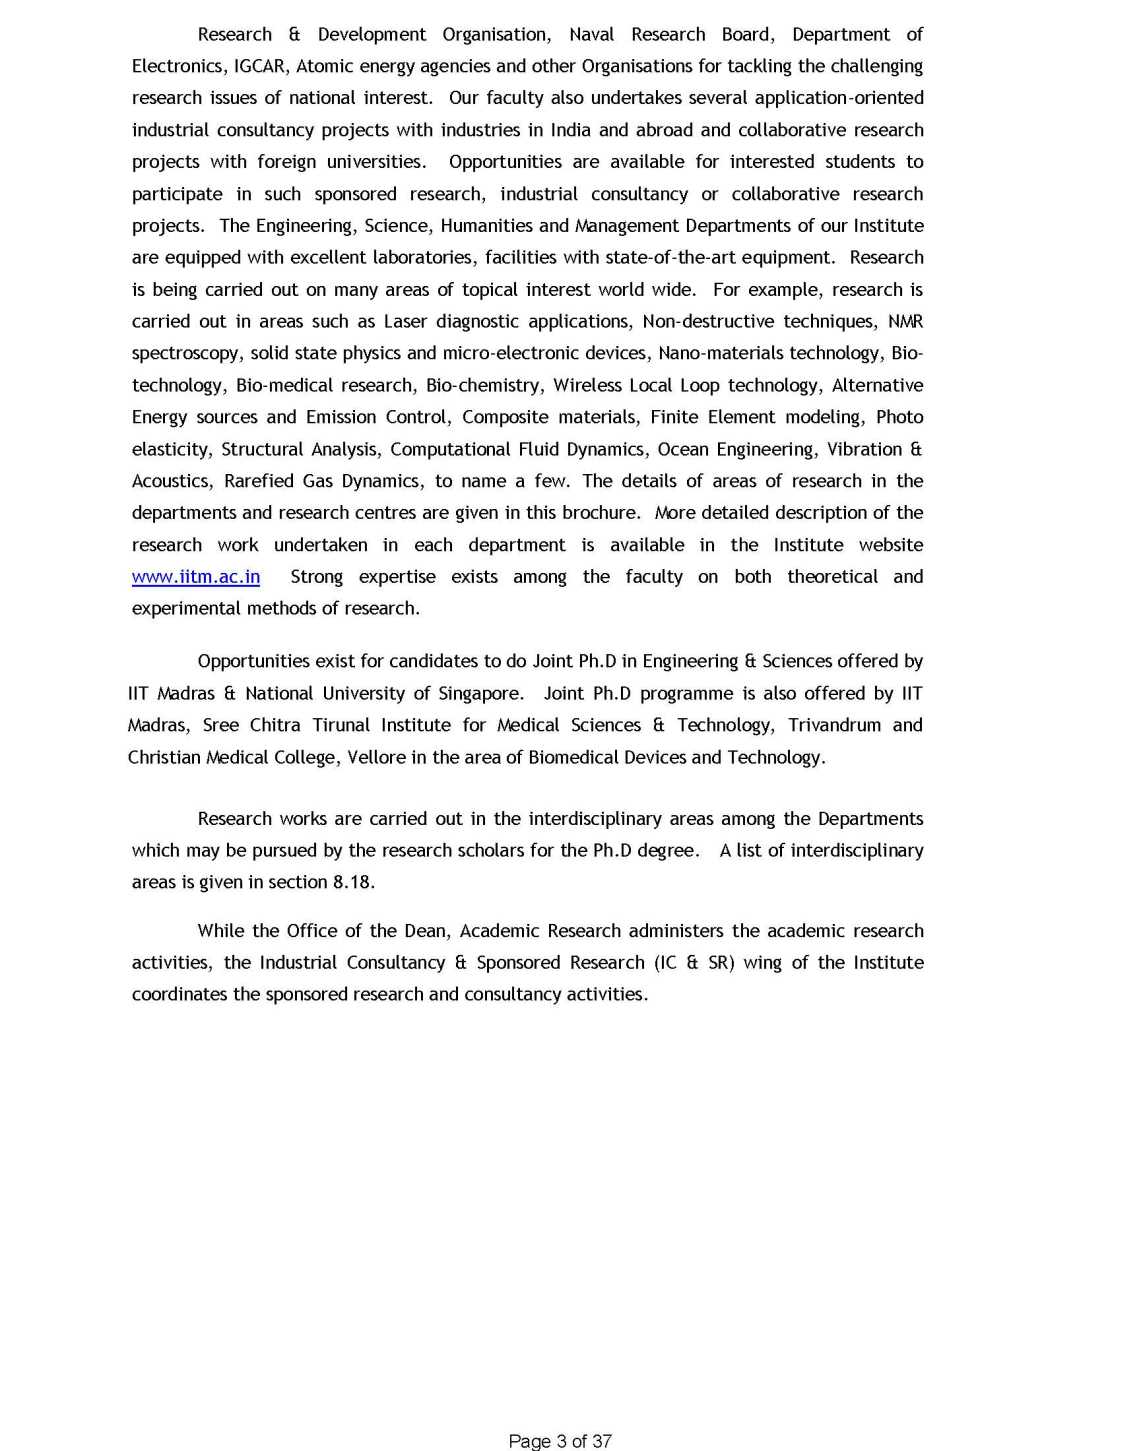 university of madras phd thesis guidelines